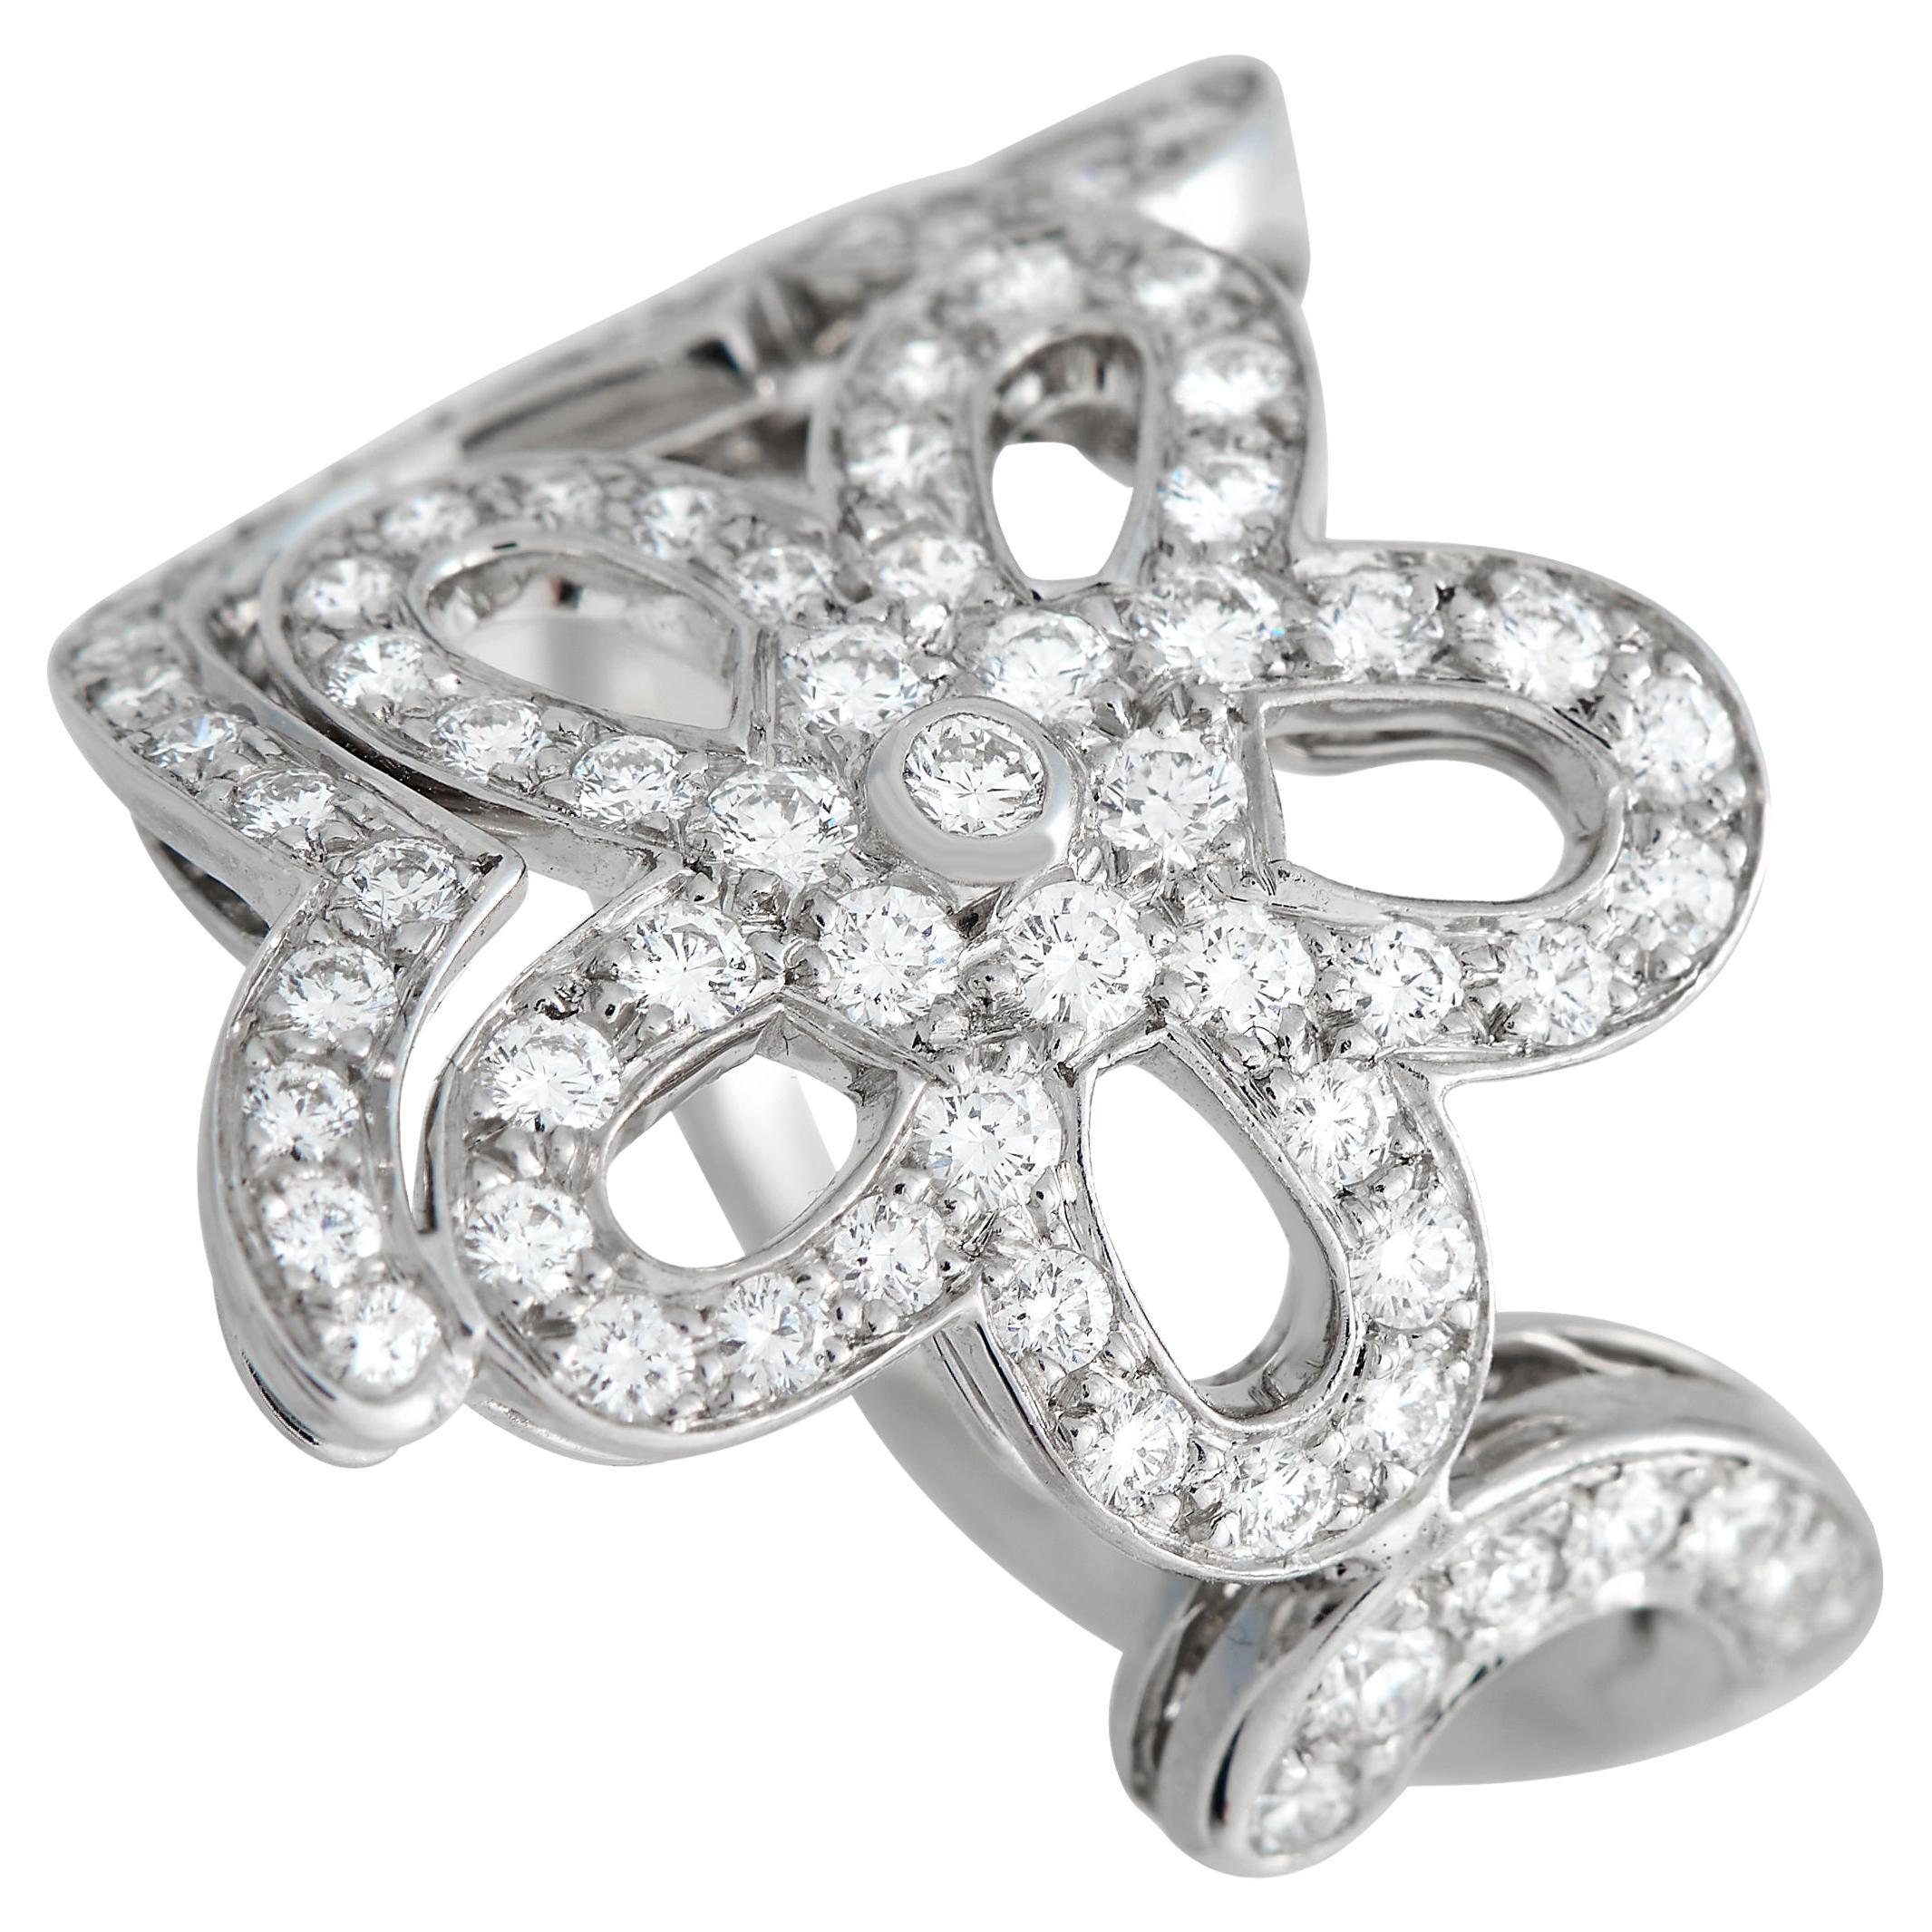 Van Cleef & Arpels 18K White Gold 0.85ct Diamond Flower Lace Cocktail Ring